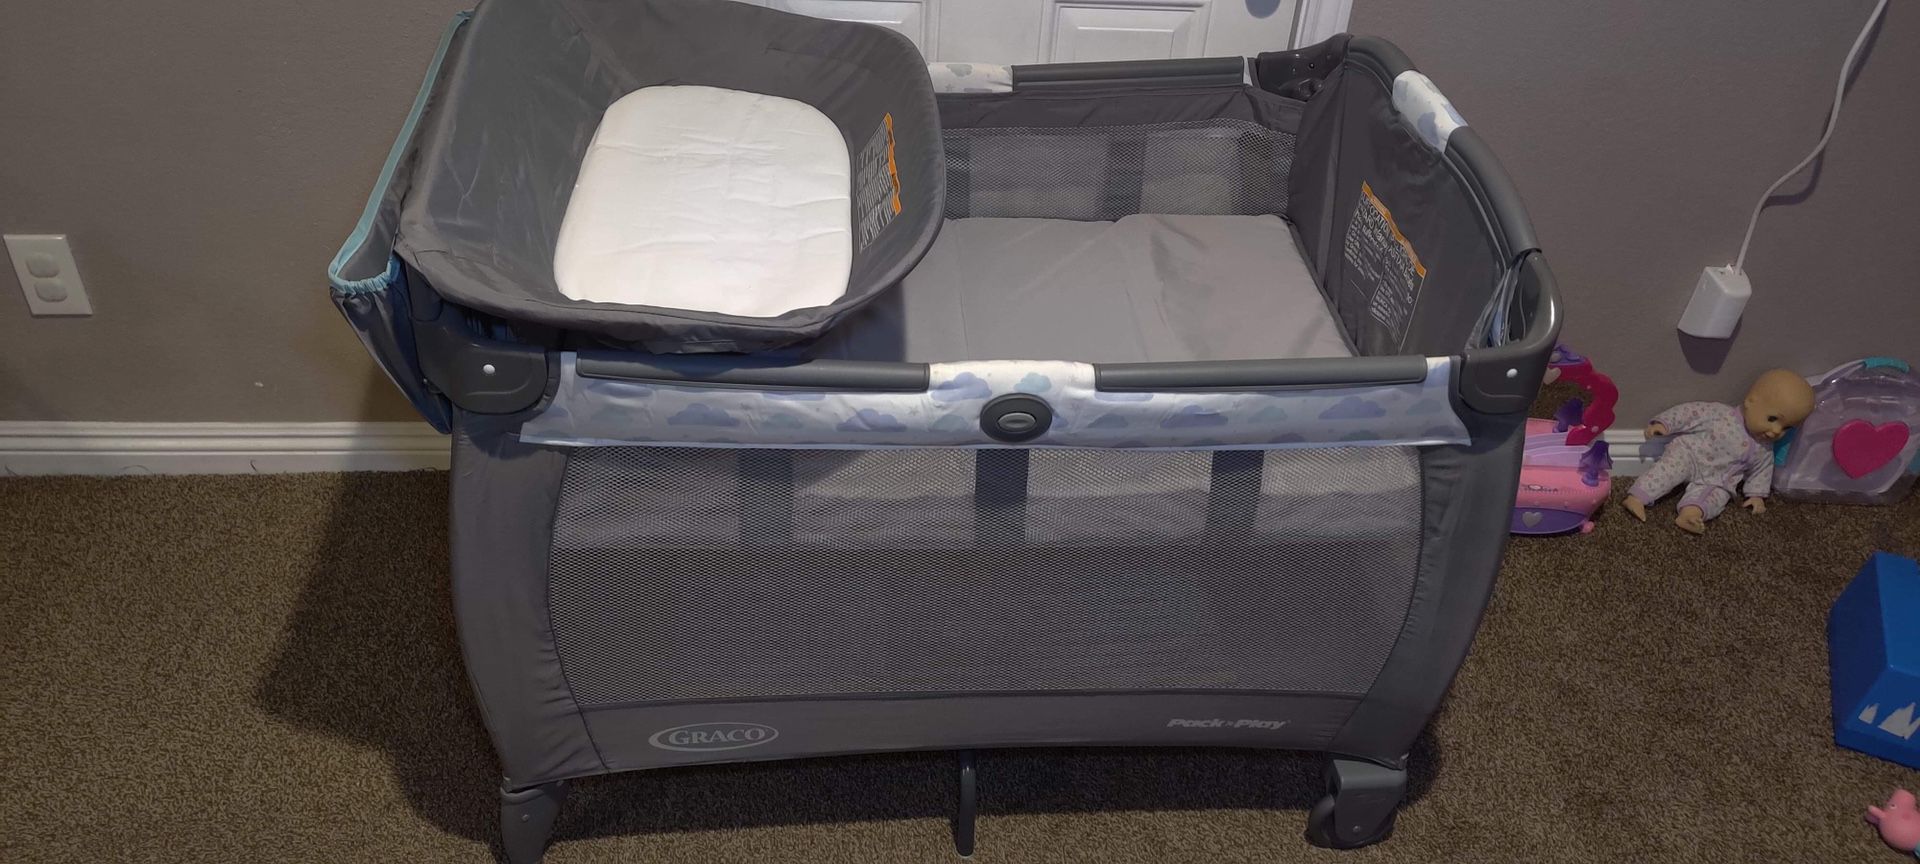 Graco pack n play with diaper changer and infant bassinet